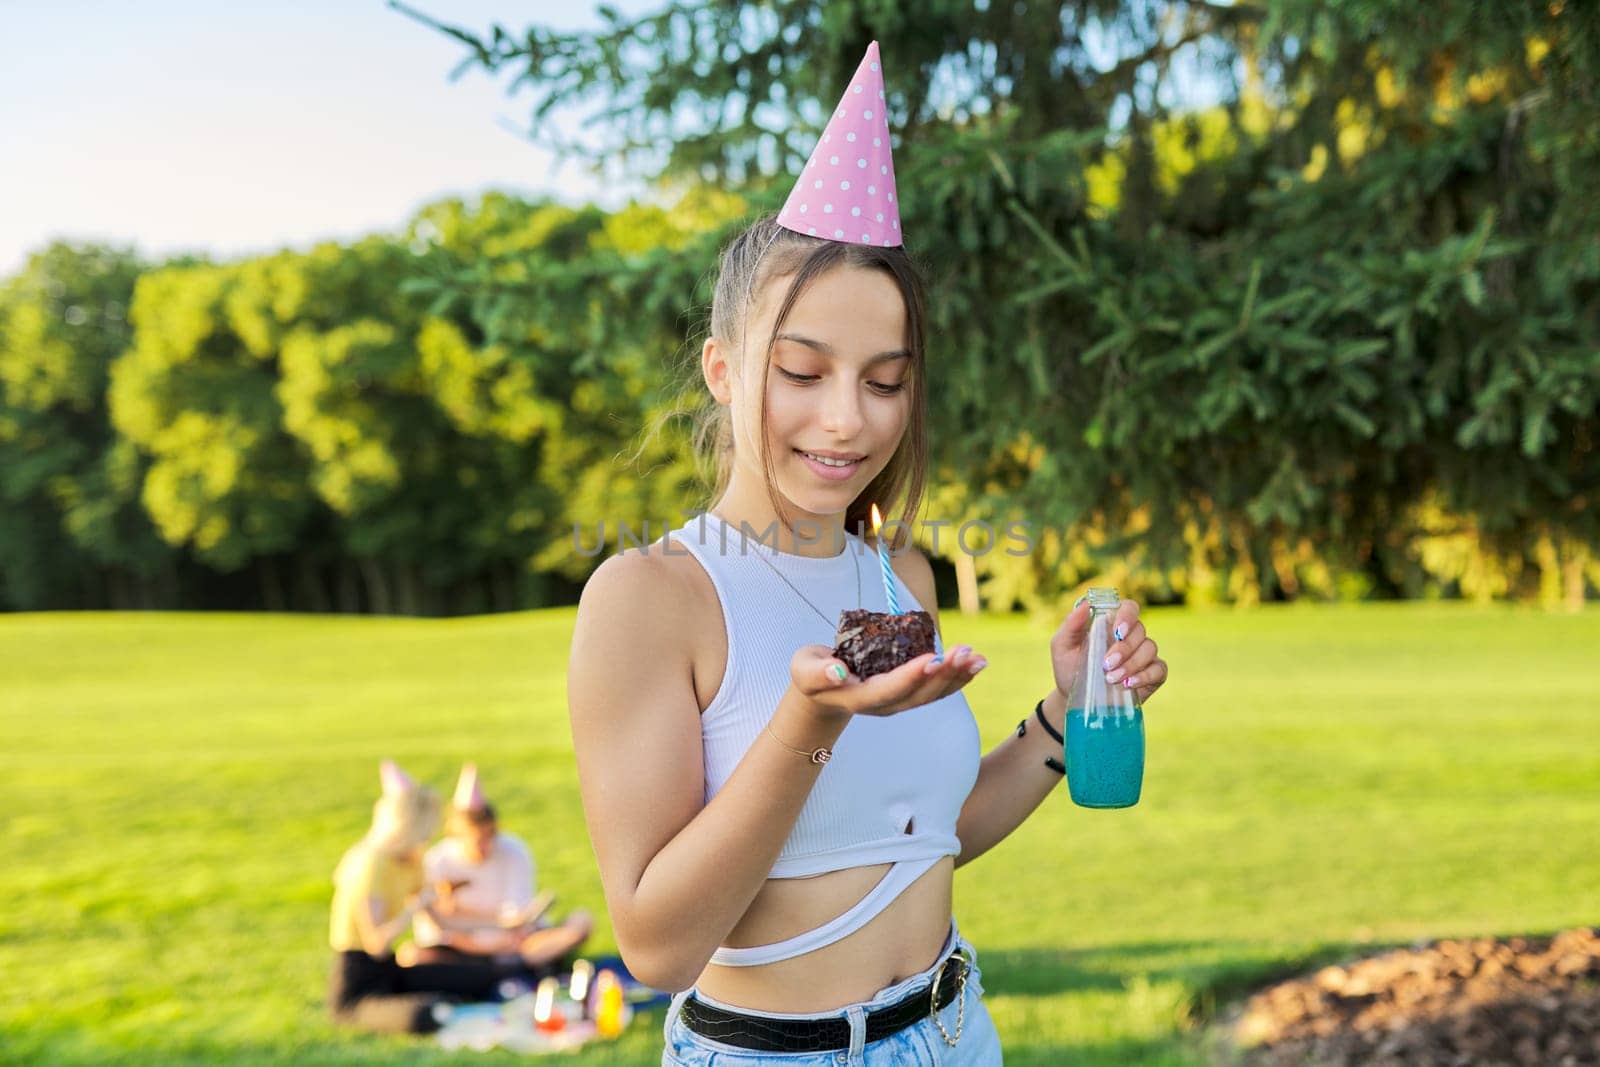 Birthday, teenage girl in festiv hat with cake and candle at outdoor party. Picnic in nature, happy having fun female. Adolescence, holiday, birthday, celebration, age concept